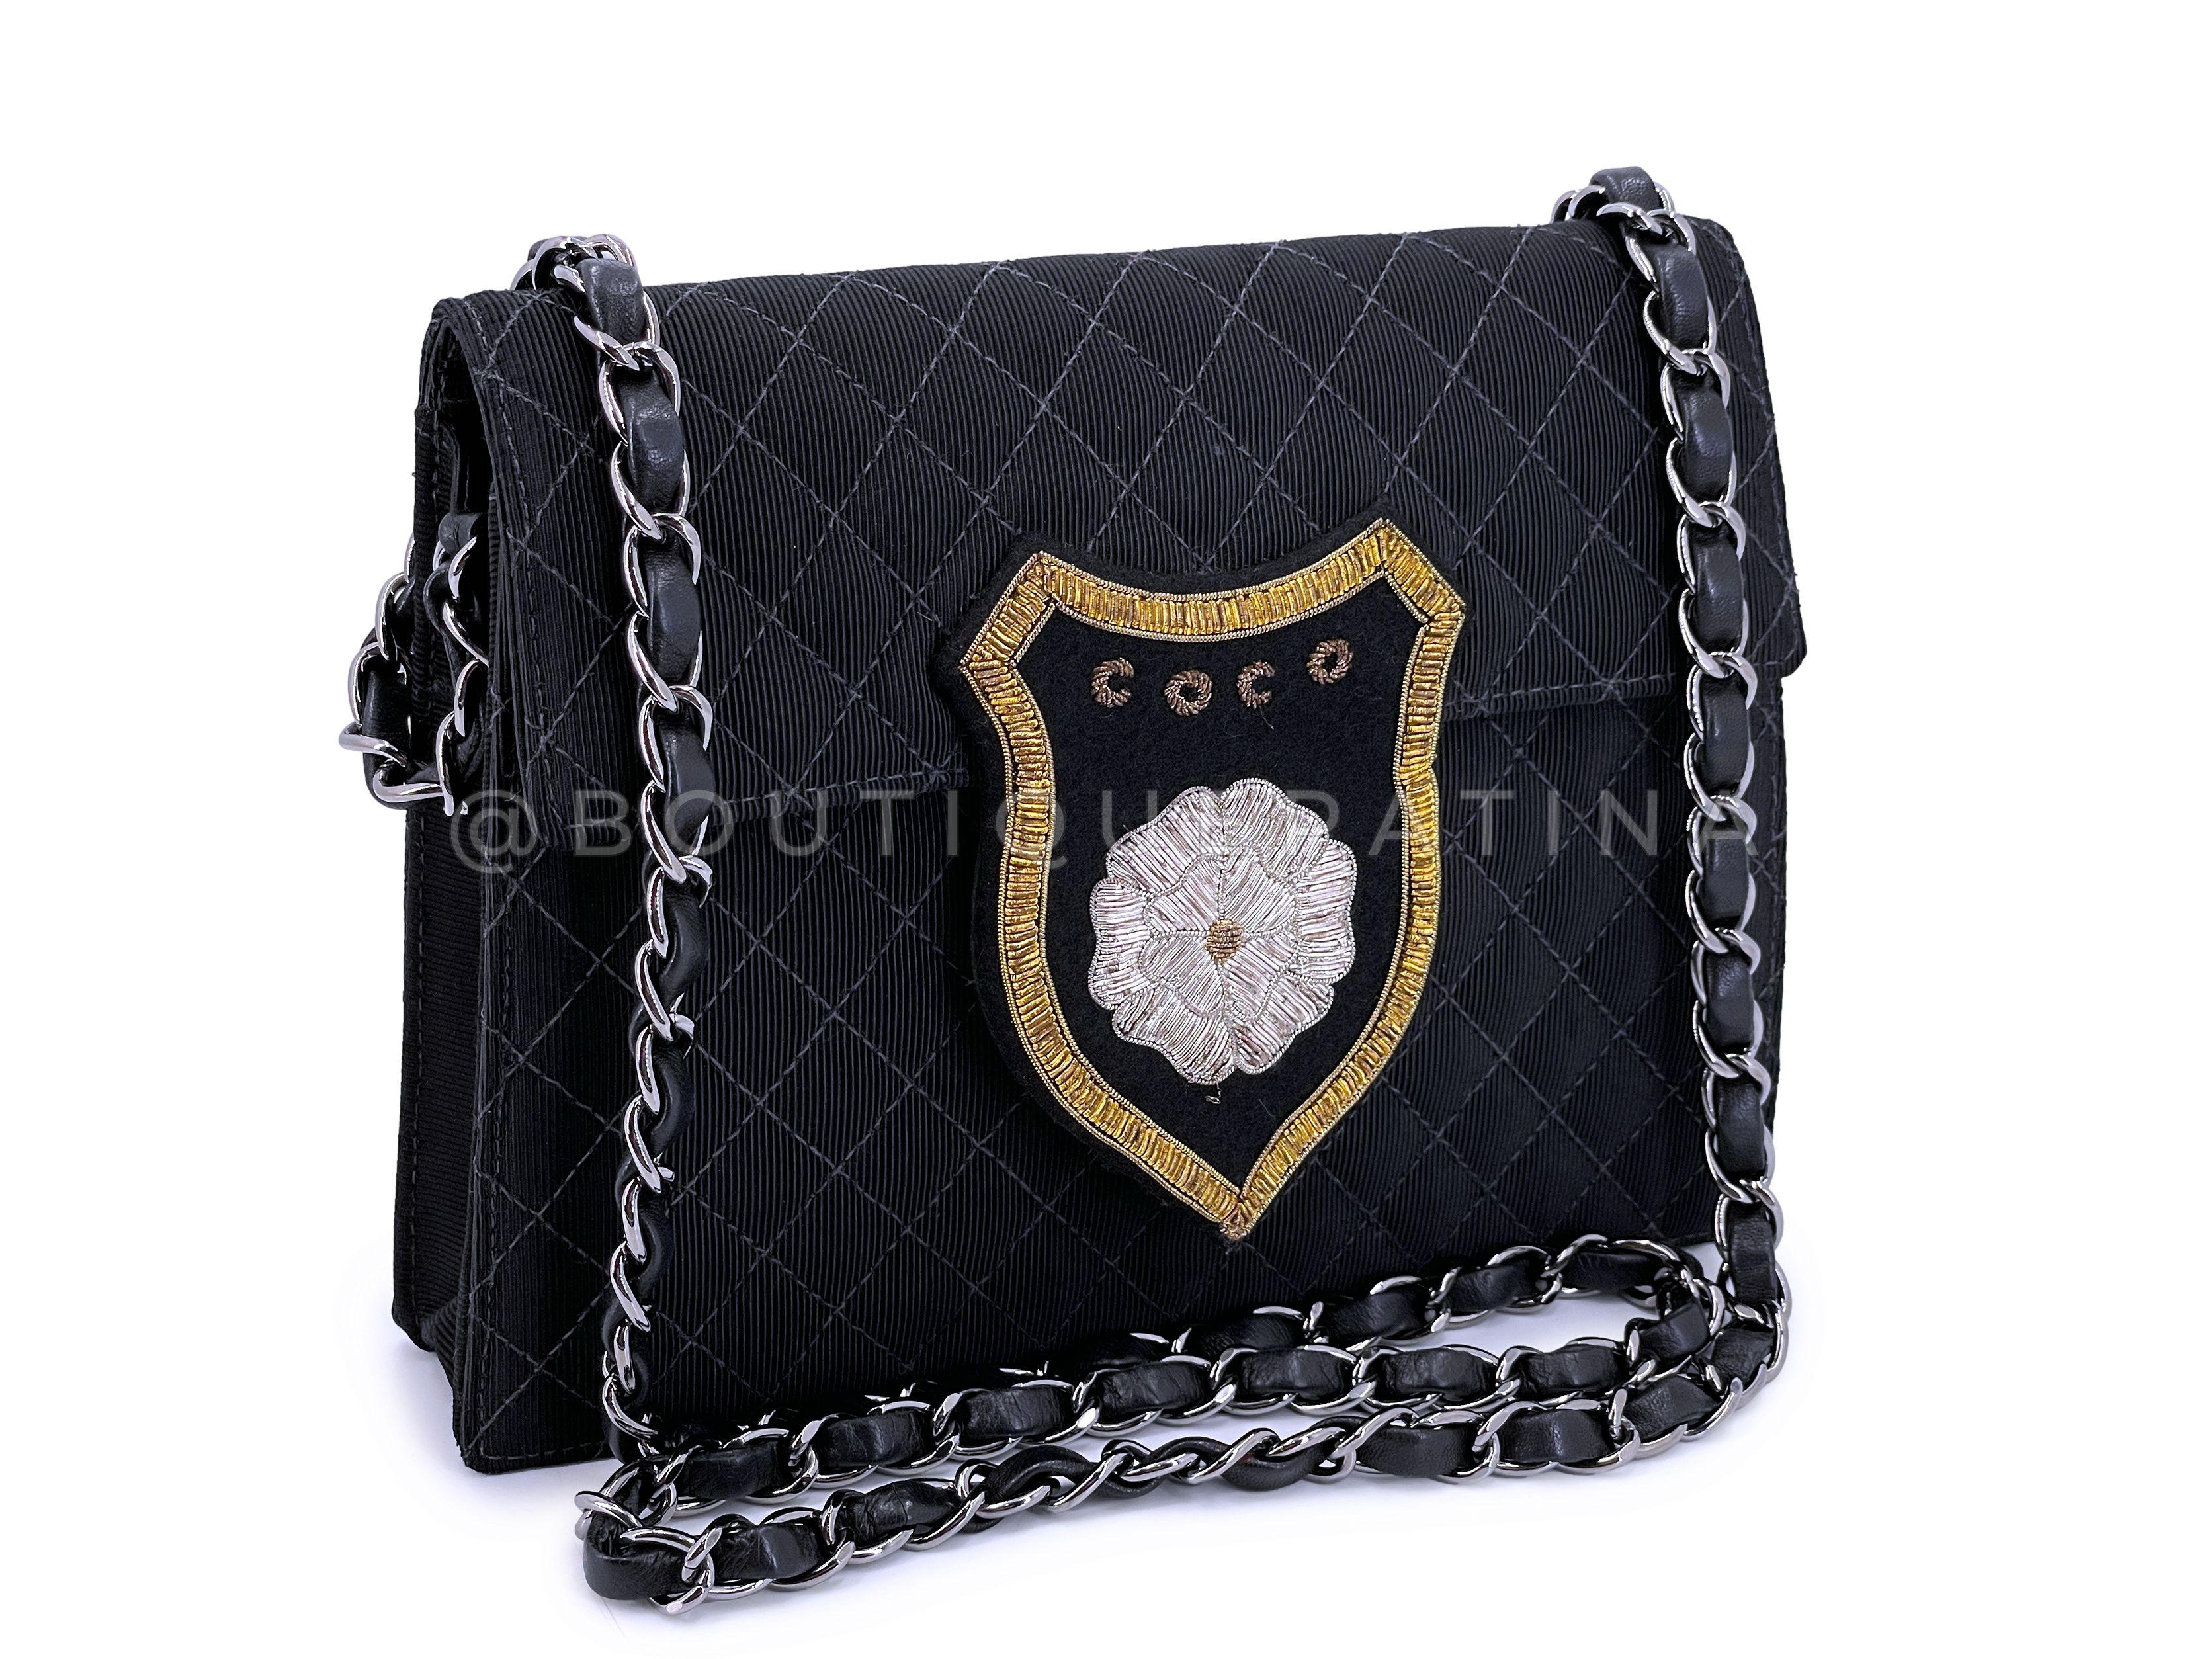 Store item: 67545
The Chanel Vintage 05C Classic Crest Mini Convertible Flap Bag SHW is a vintage classic and for good reason - this famed Chanel vintage crest patch has only shown up on limited pieces - jackets, jeans and select handbag models. 

A